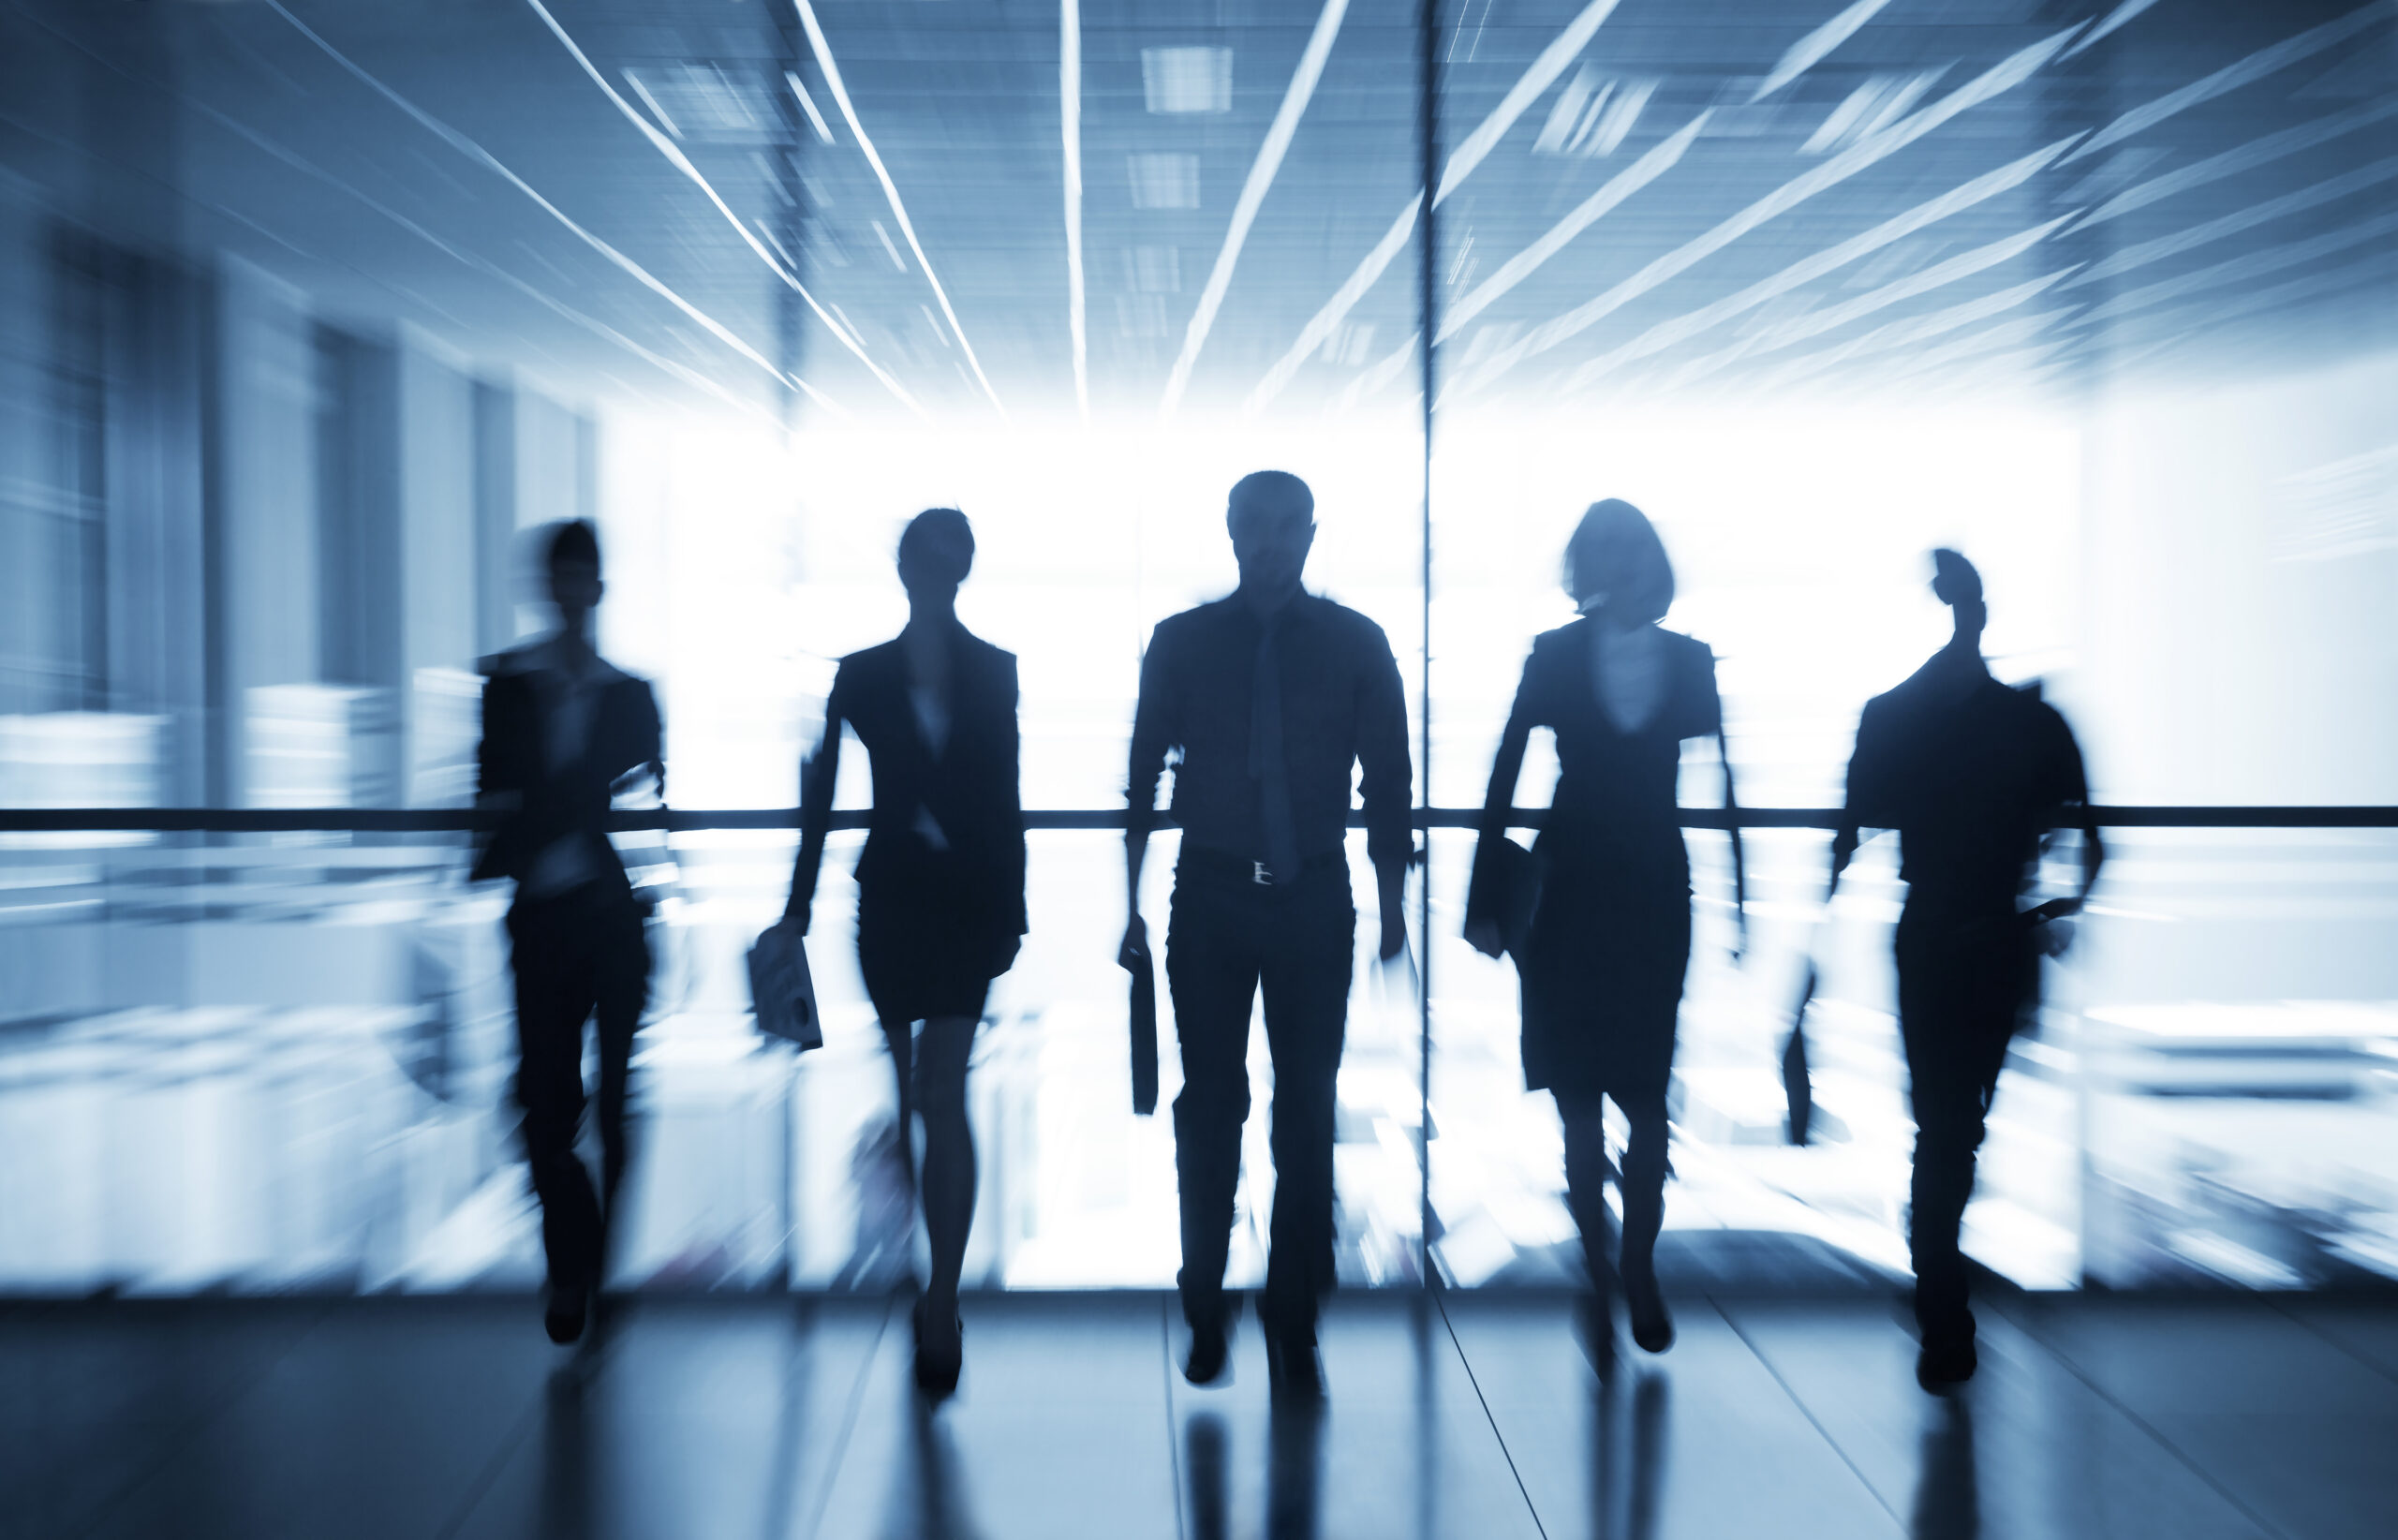 Five professional male and female consultants walking into an office space with a blurred background.